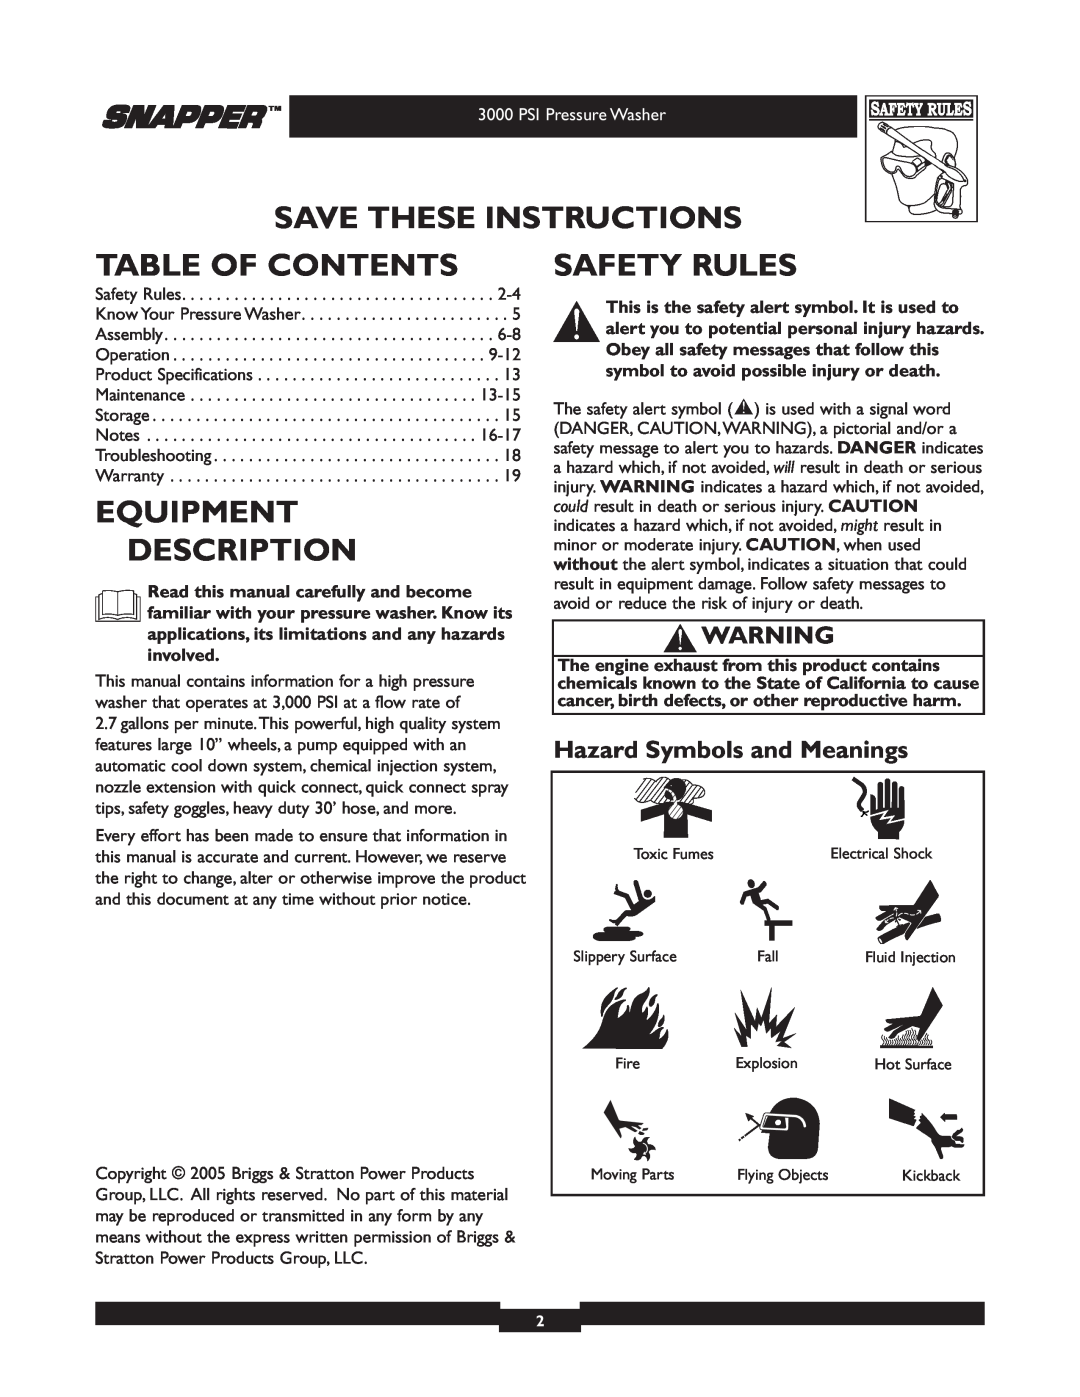 Snapper 020231 Save These Instructions, Table Of Contents, Equipment Description, Safety Rules, PSI Pressure Washer 